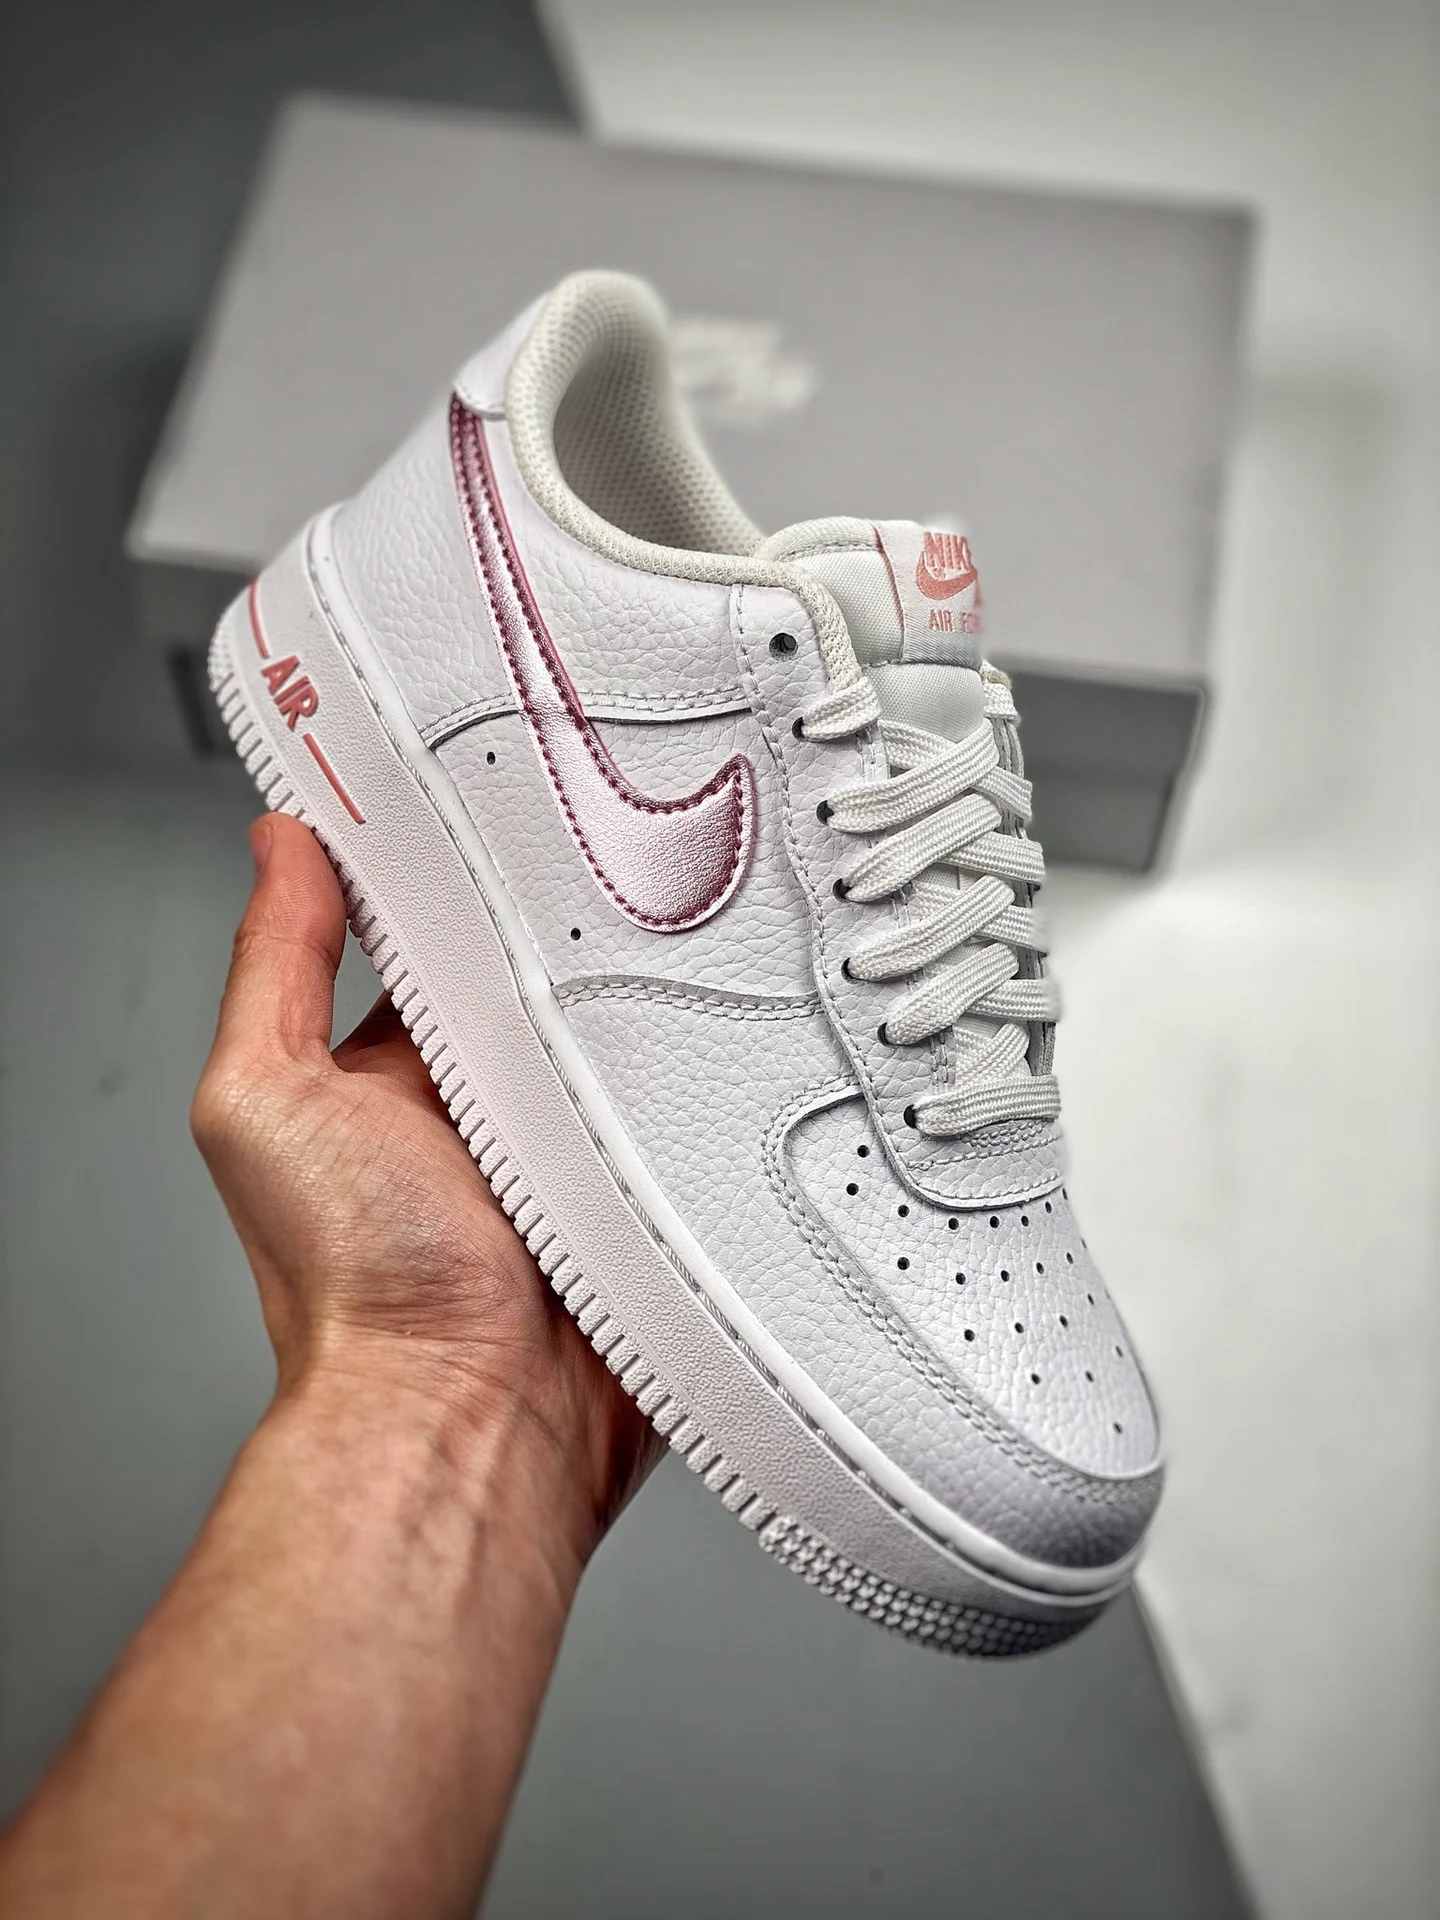 Nike Air Force 1 White Pink Glaze For Sale